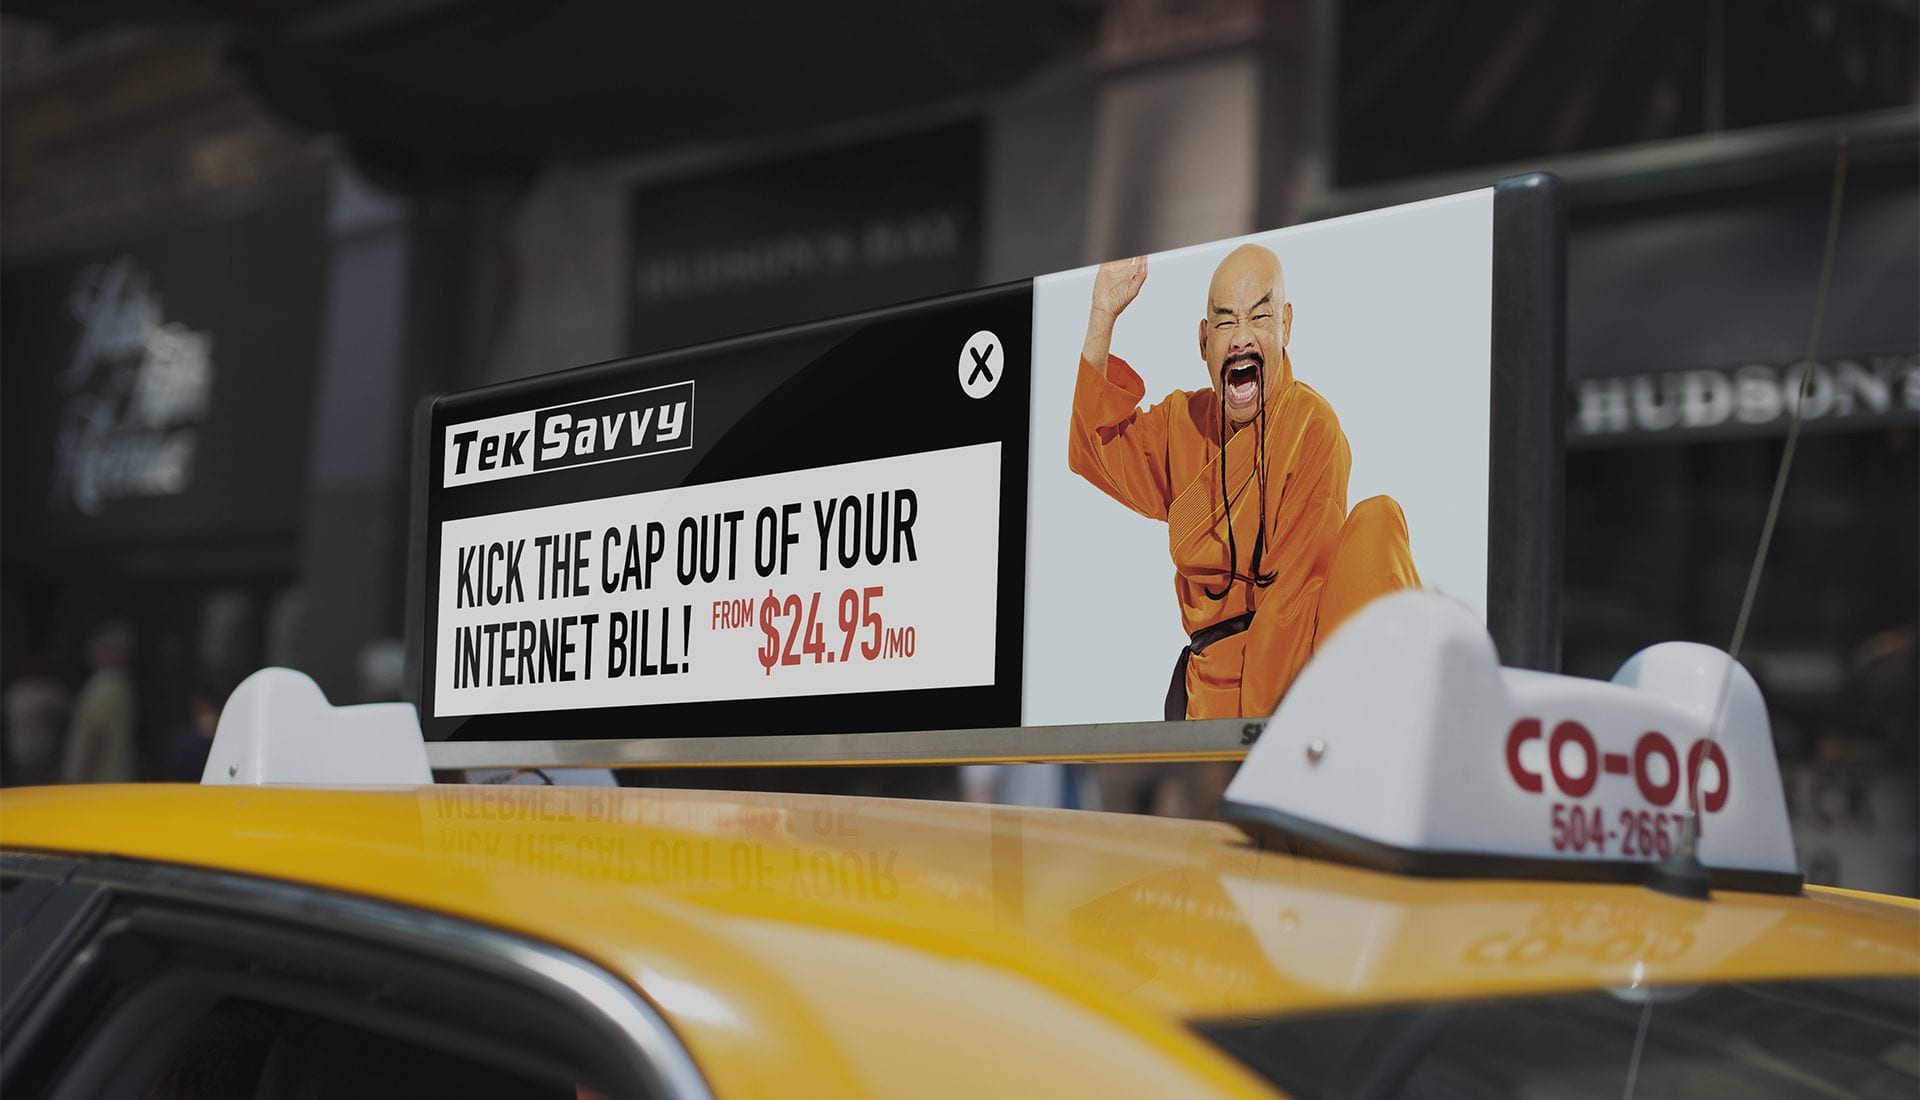 Teksavvy Sensei out-of-home taxi advertisement